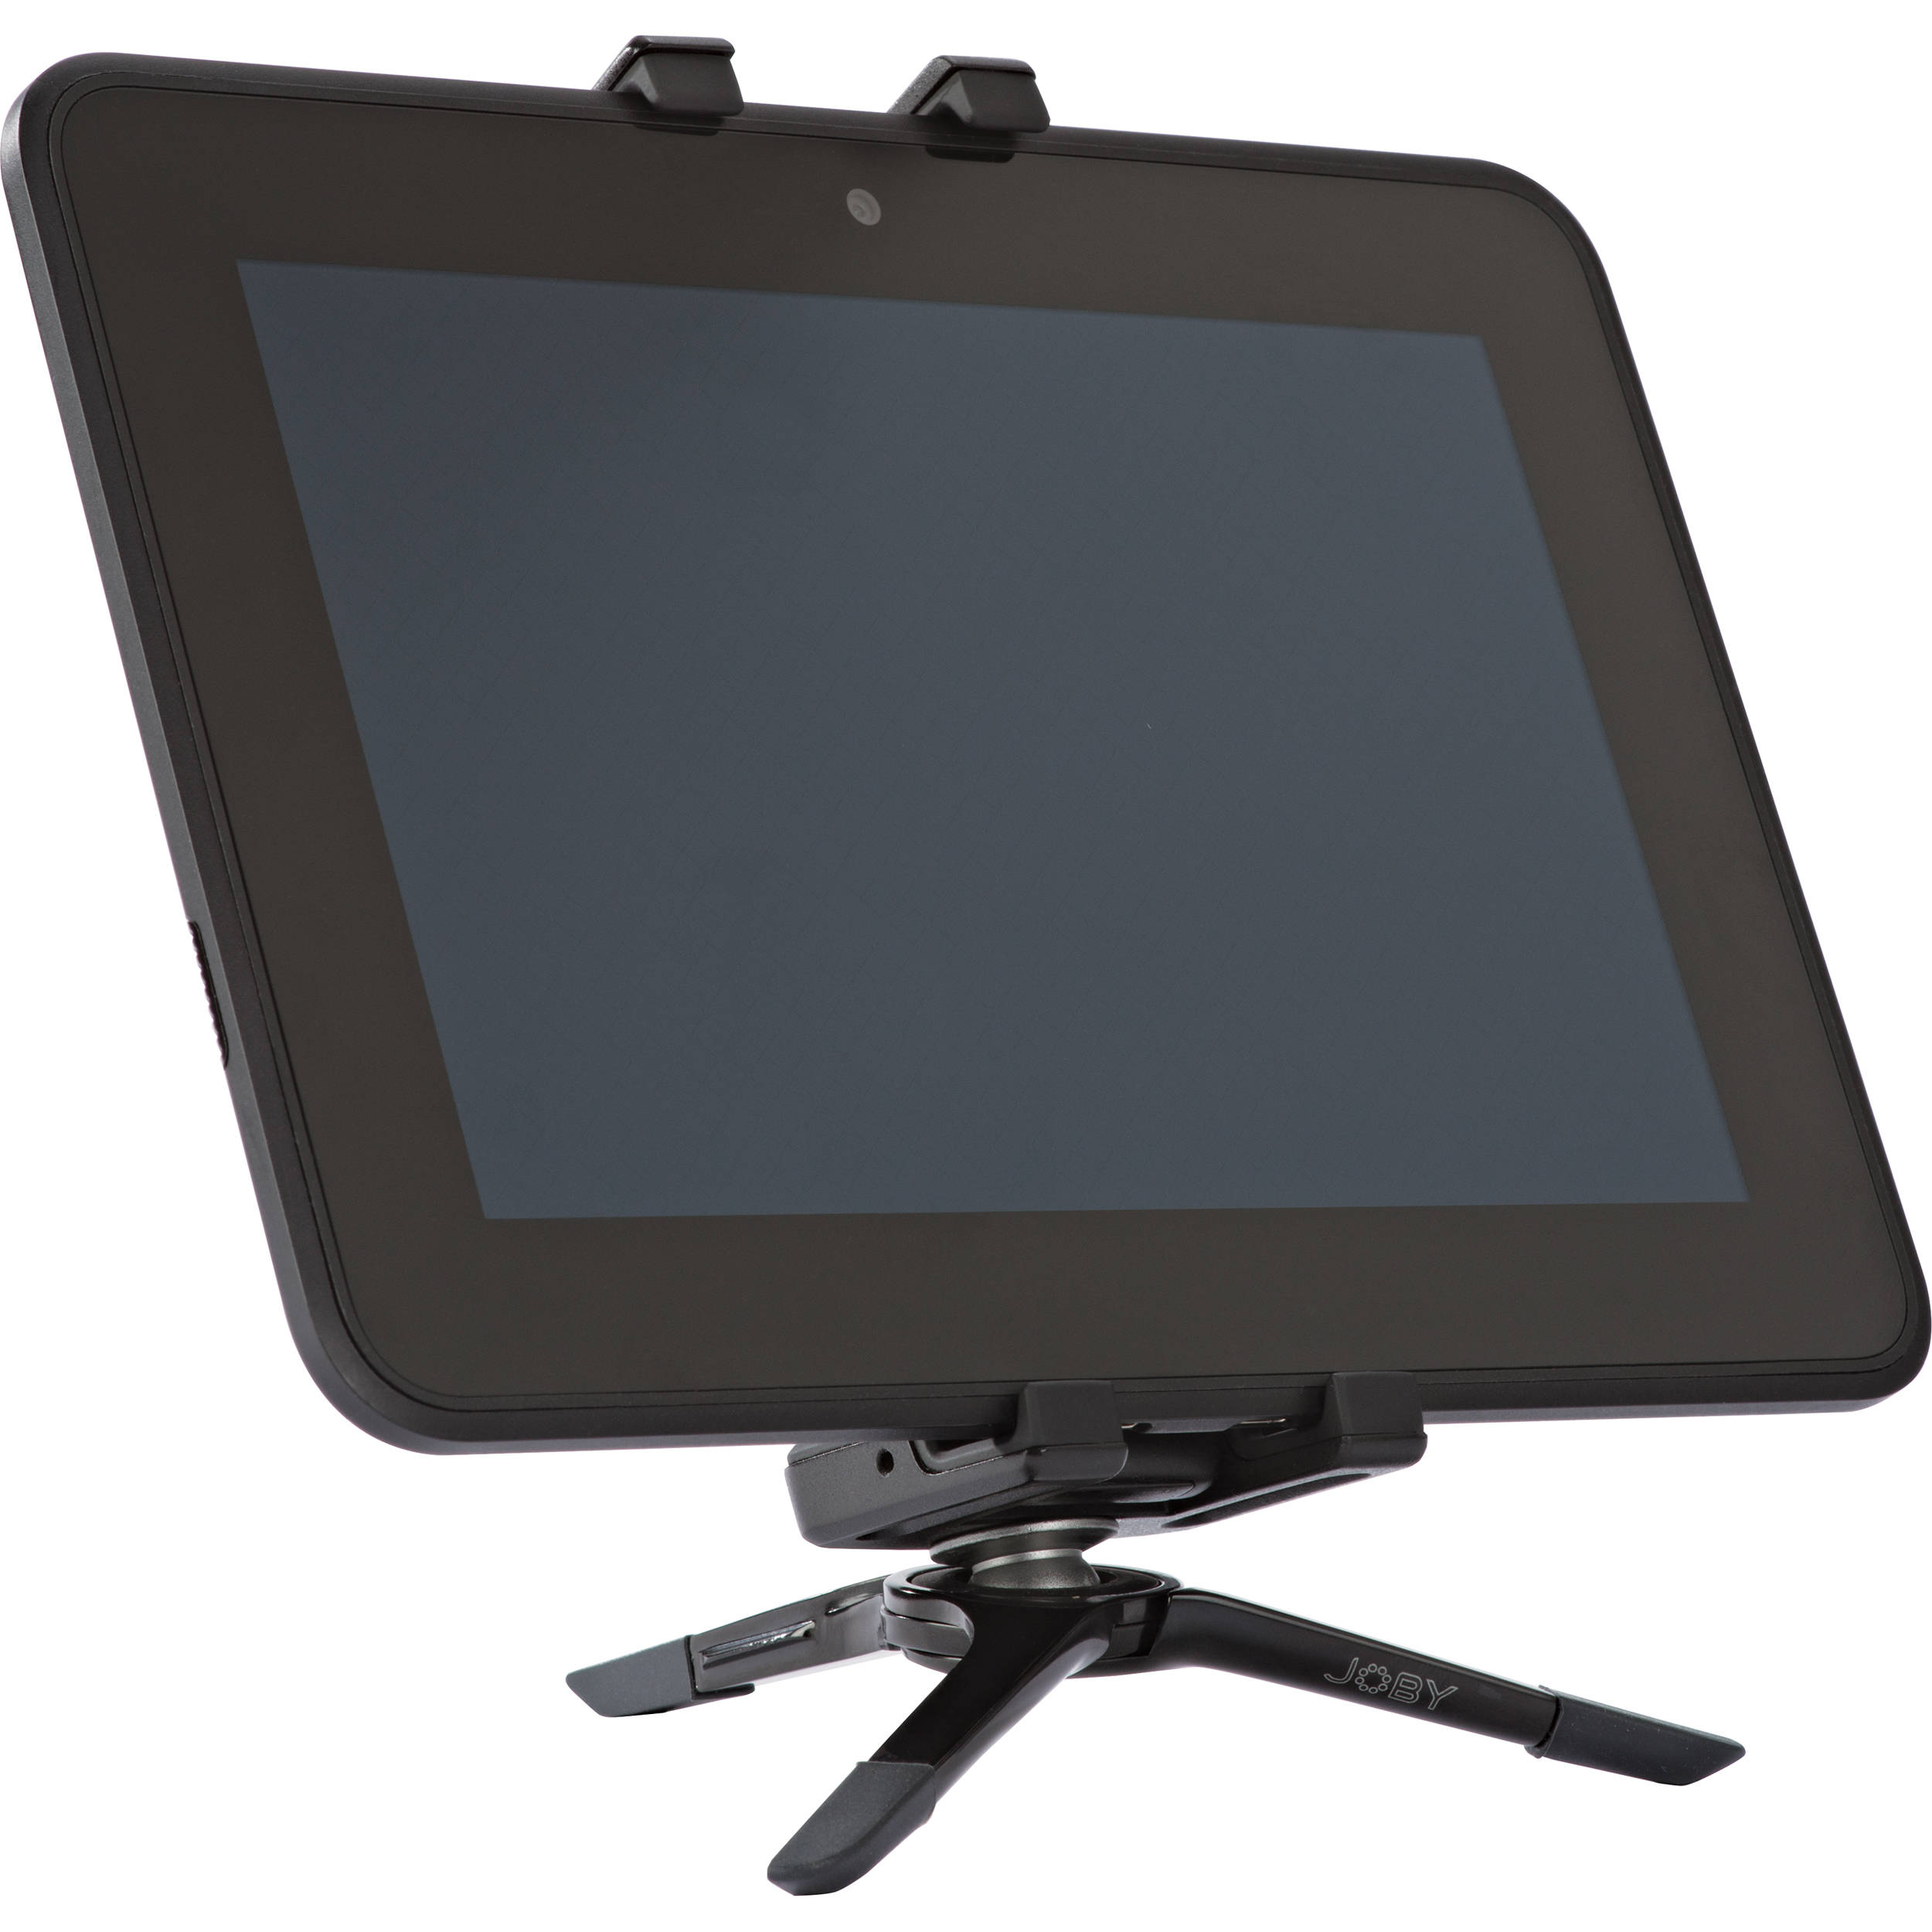 JOBY GRIPTIGHT MICRO STAND SMALL TABLET BLACK